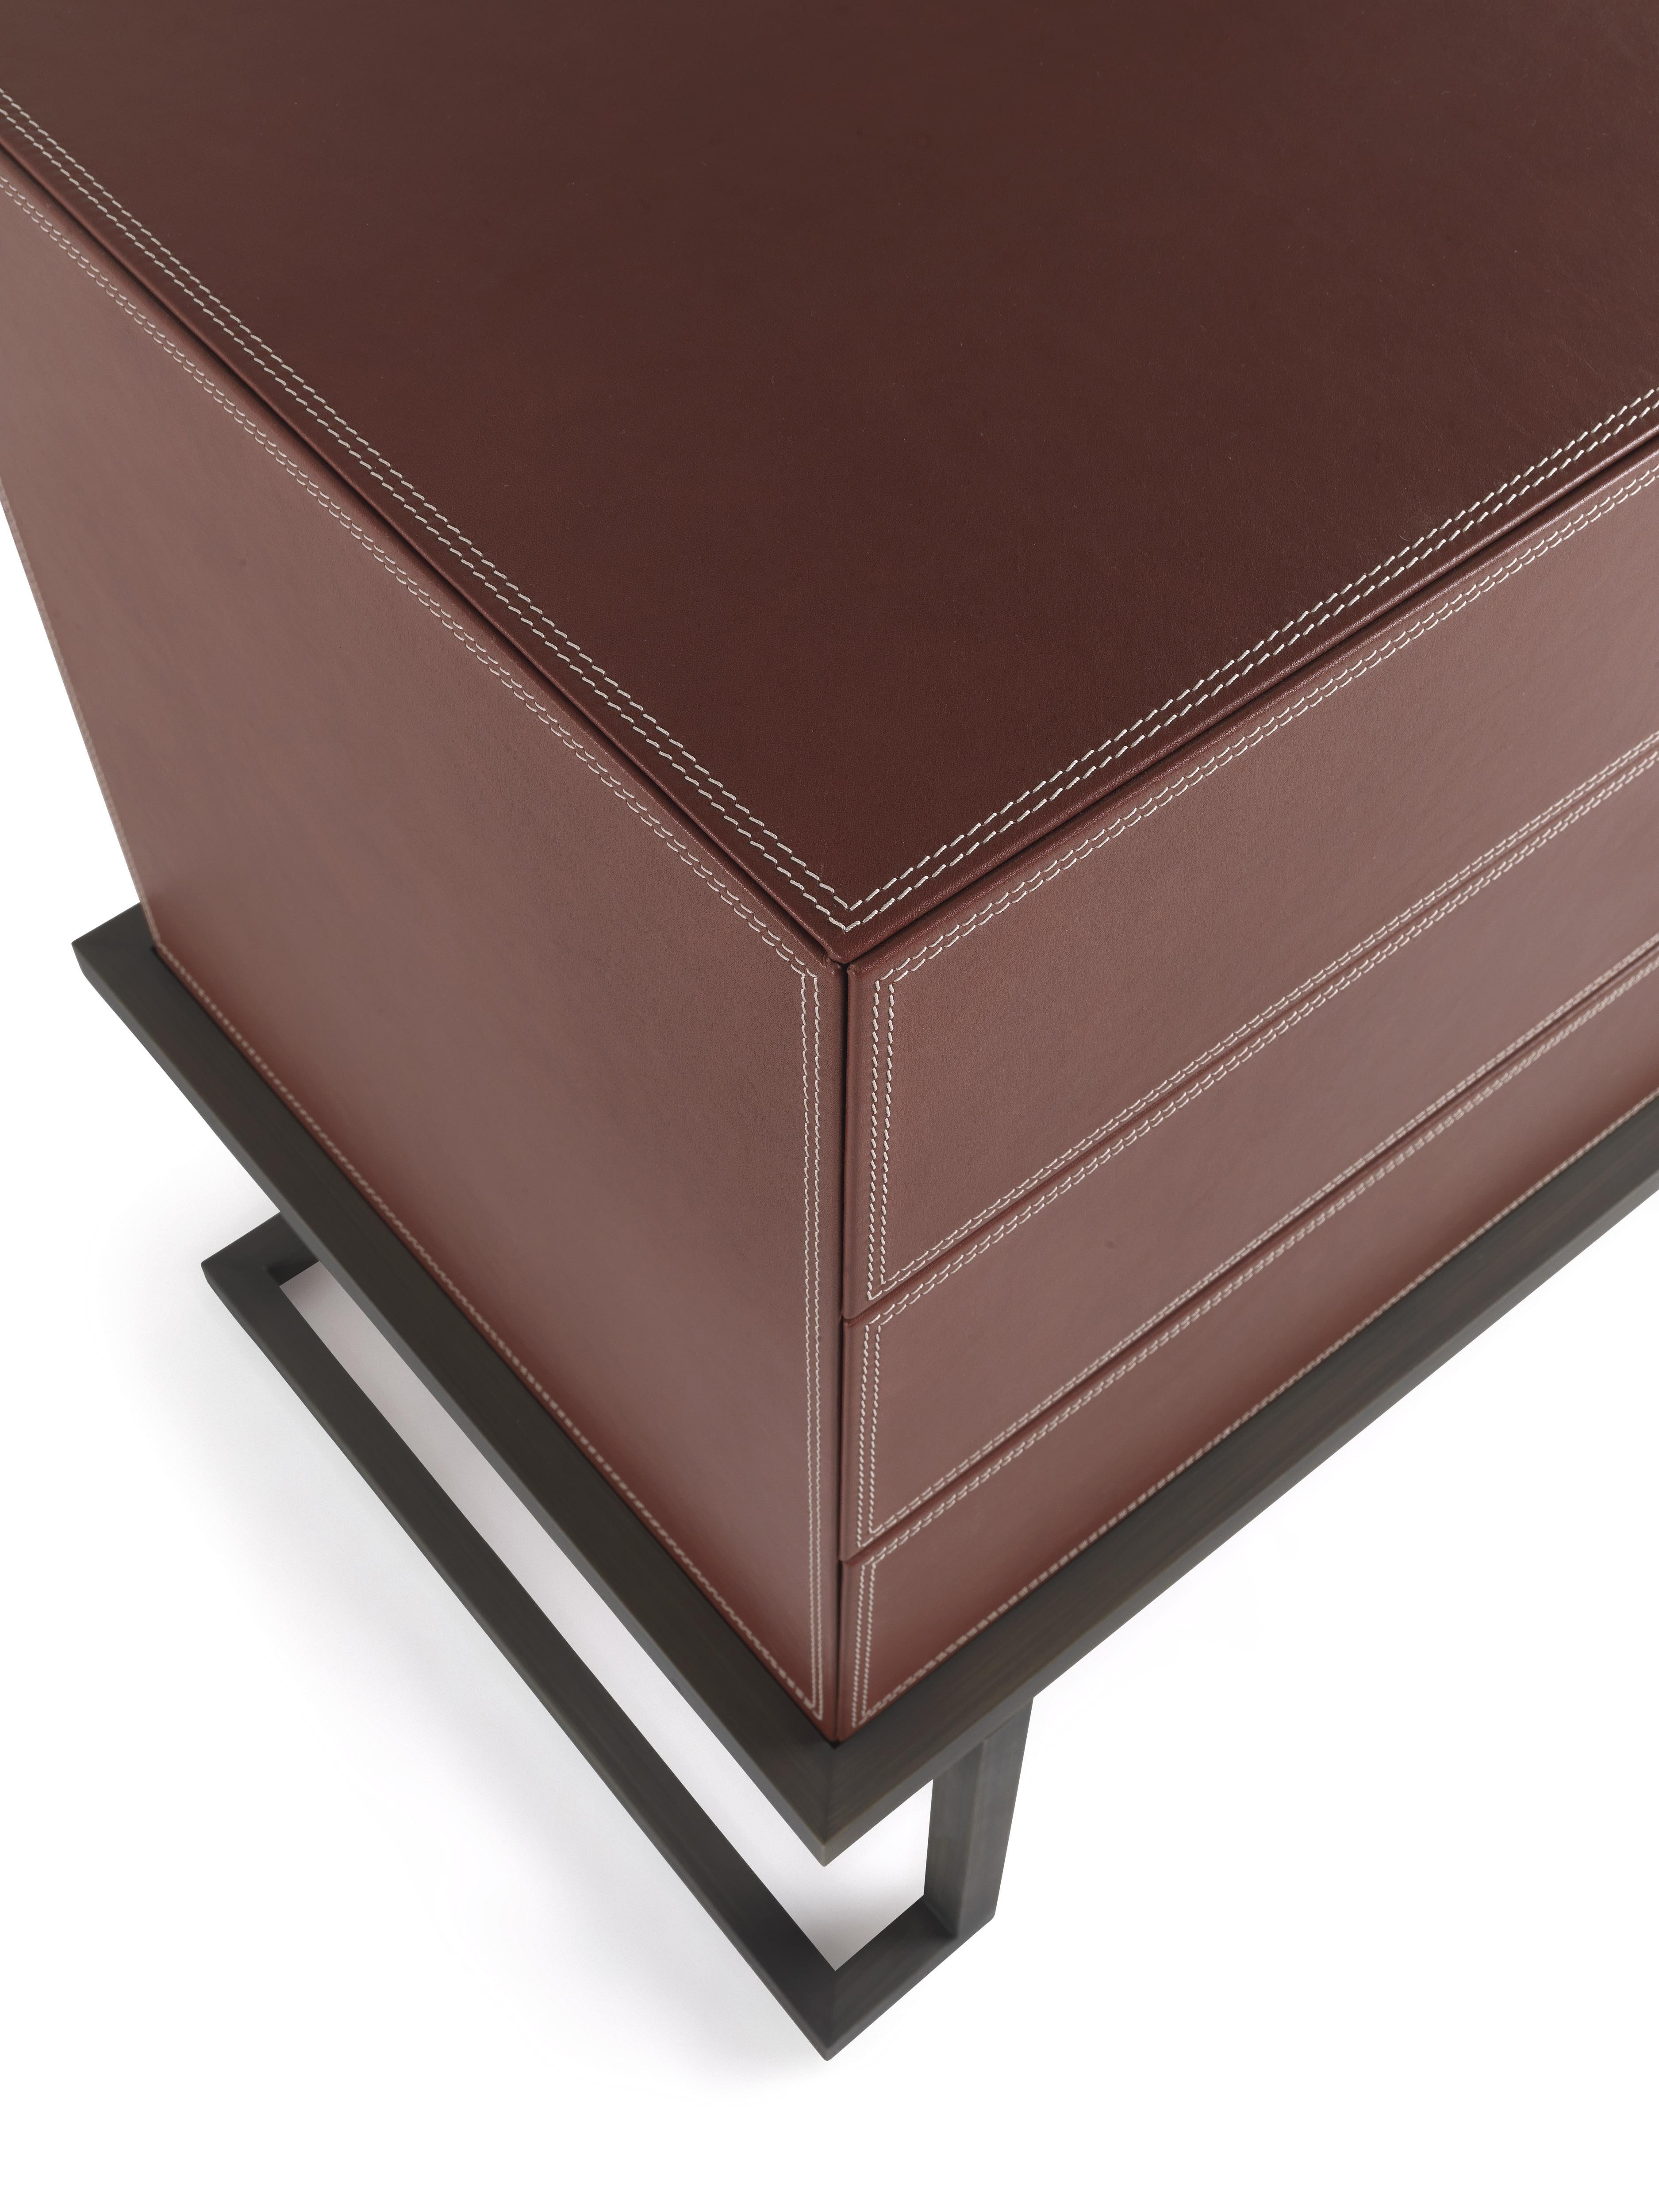 Italian 21st Century Kolkata Chest of Drawers in Leather by Etro Home Interiors